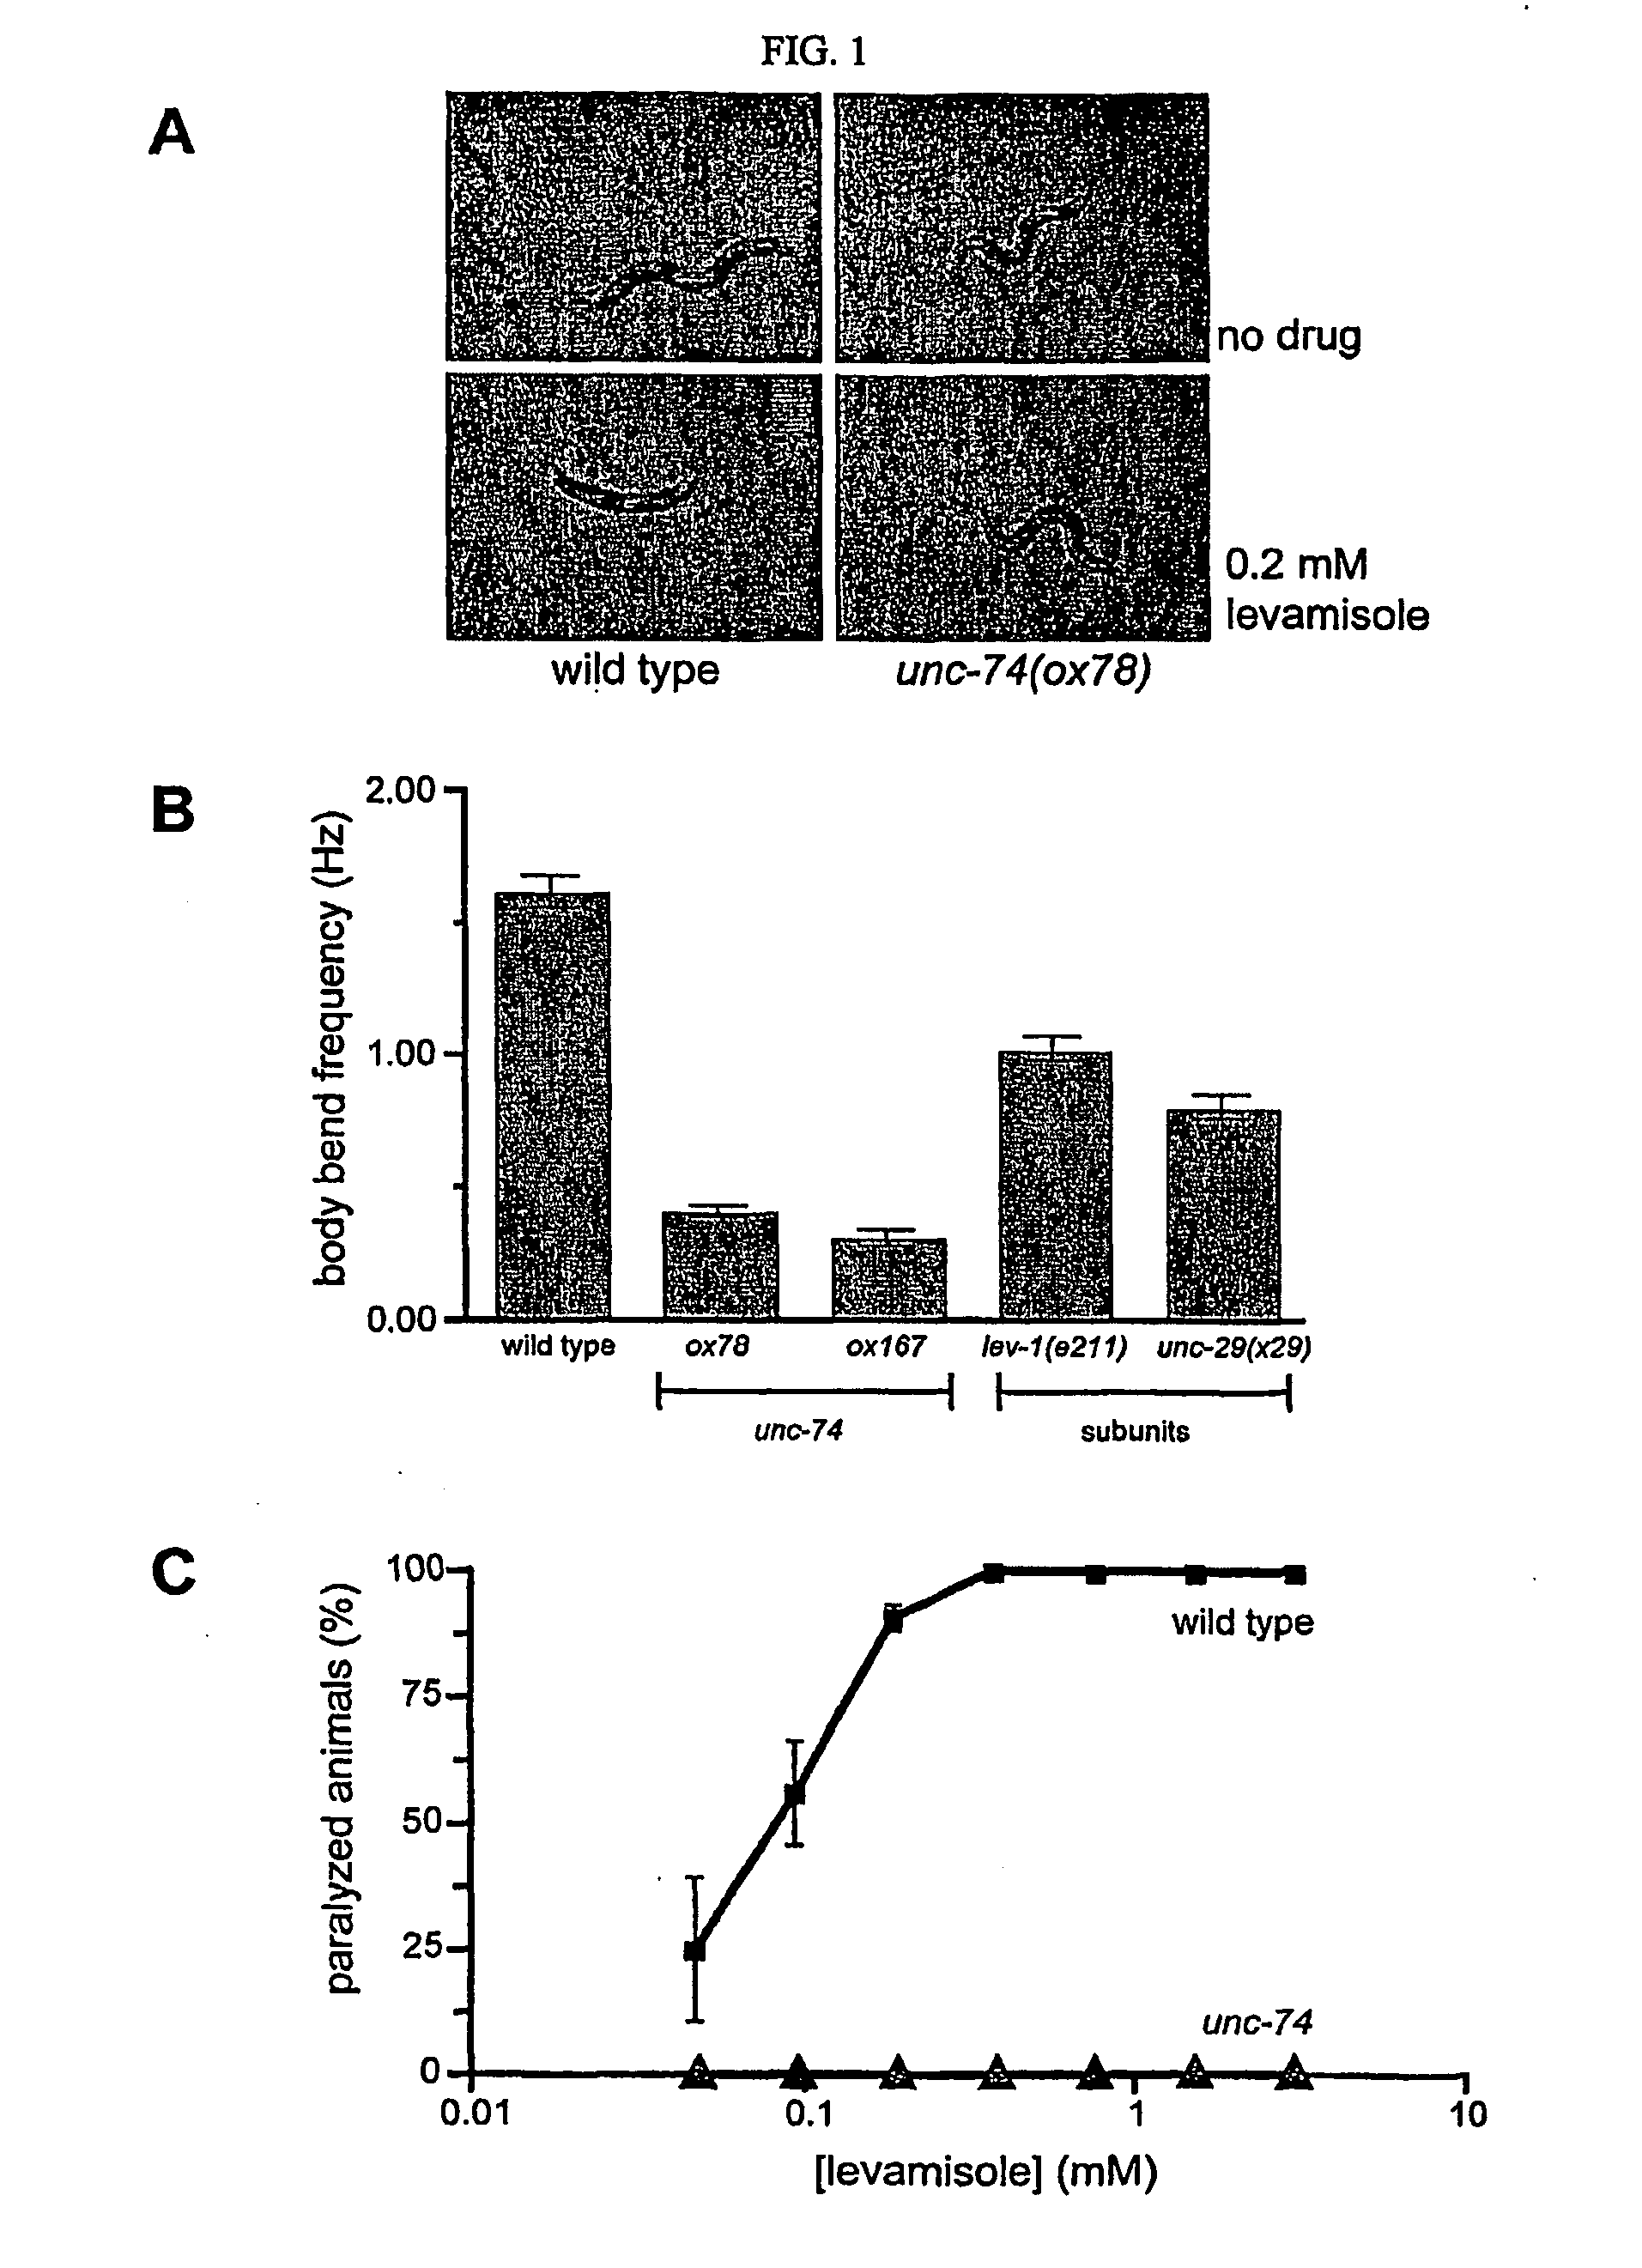 Acetylycholine gated ion channel chaperons and methods of using the same